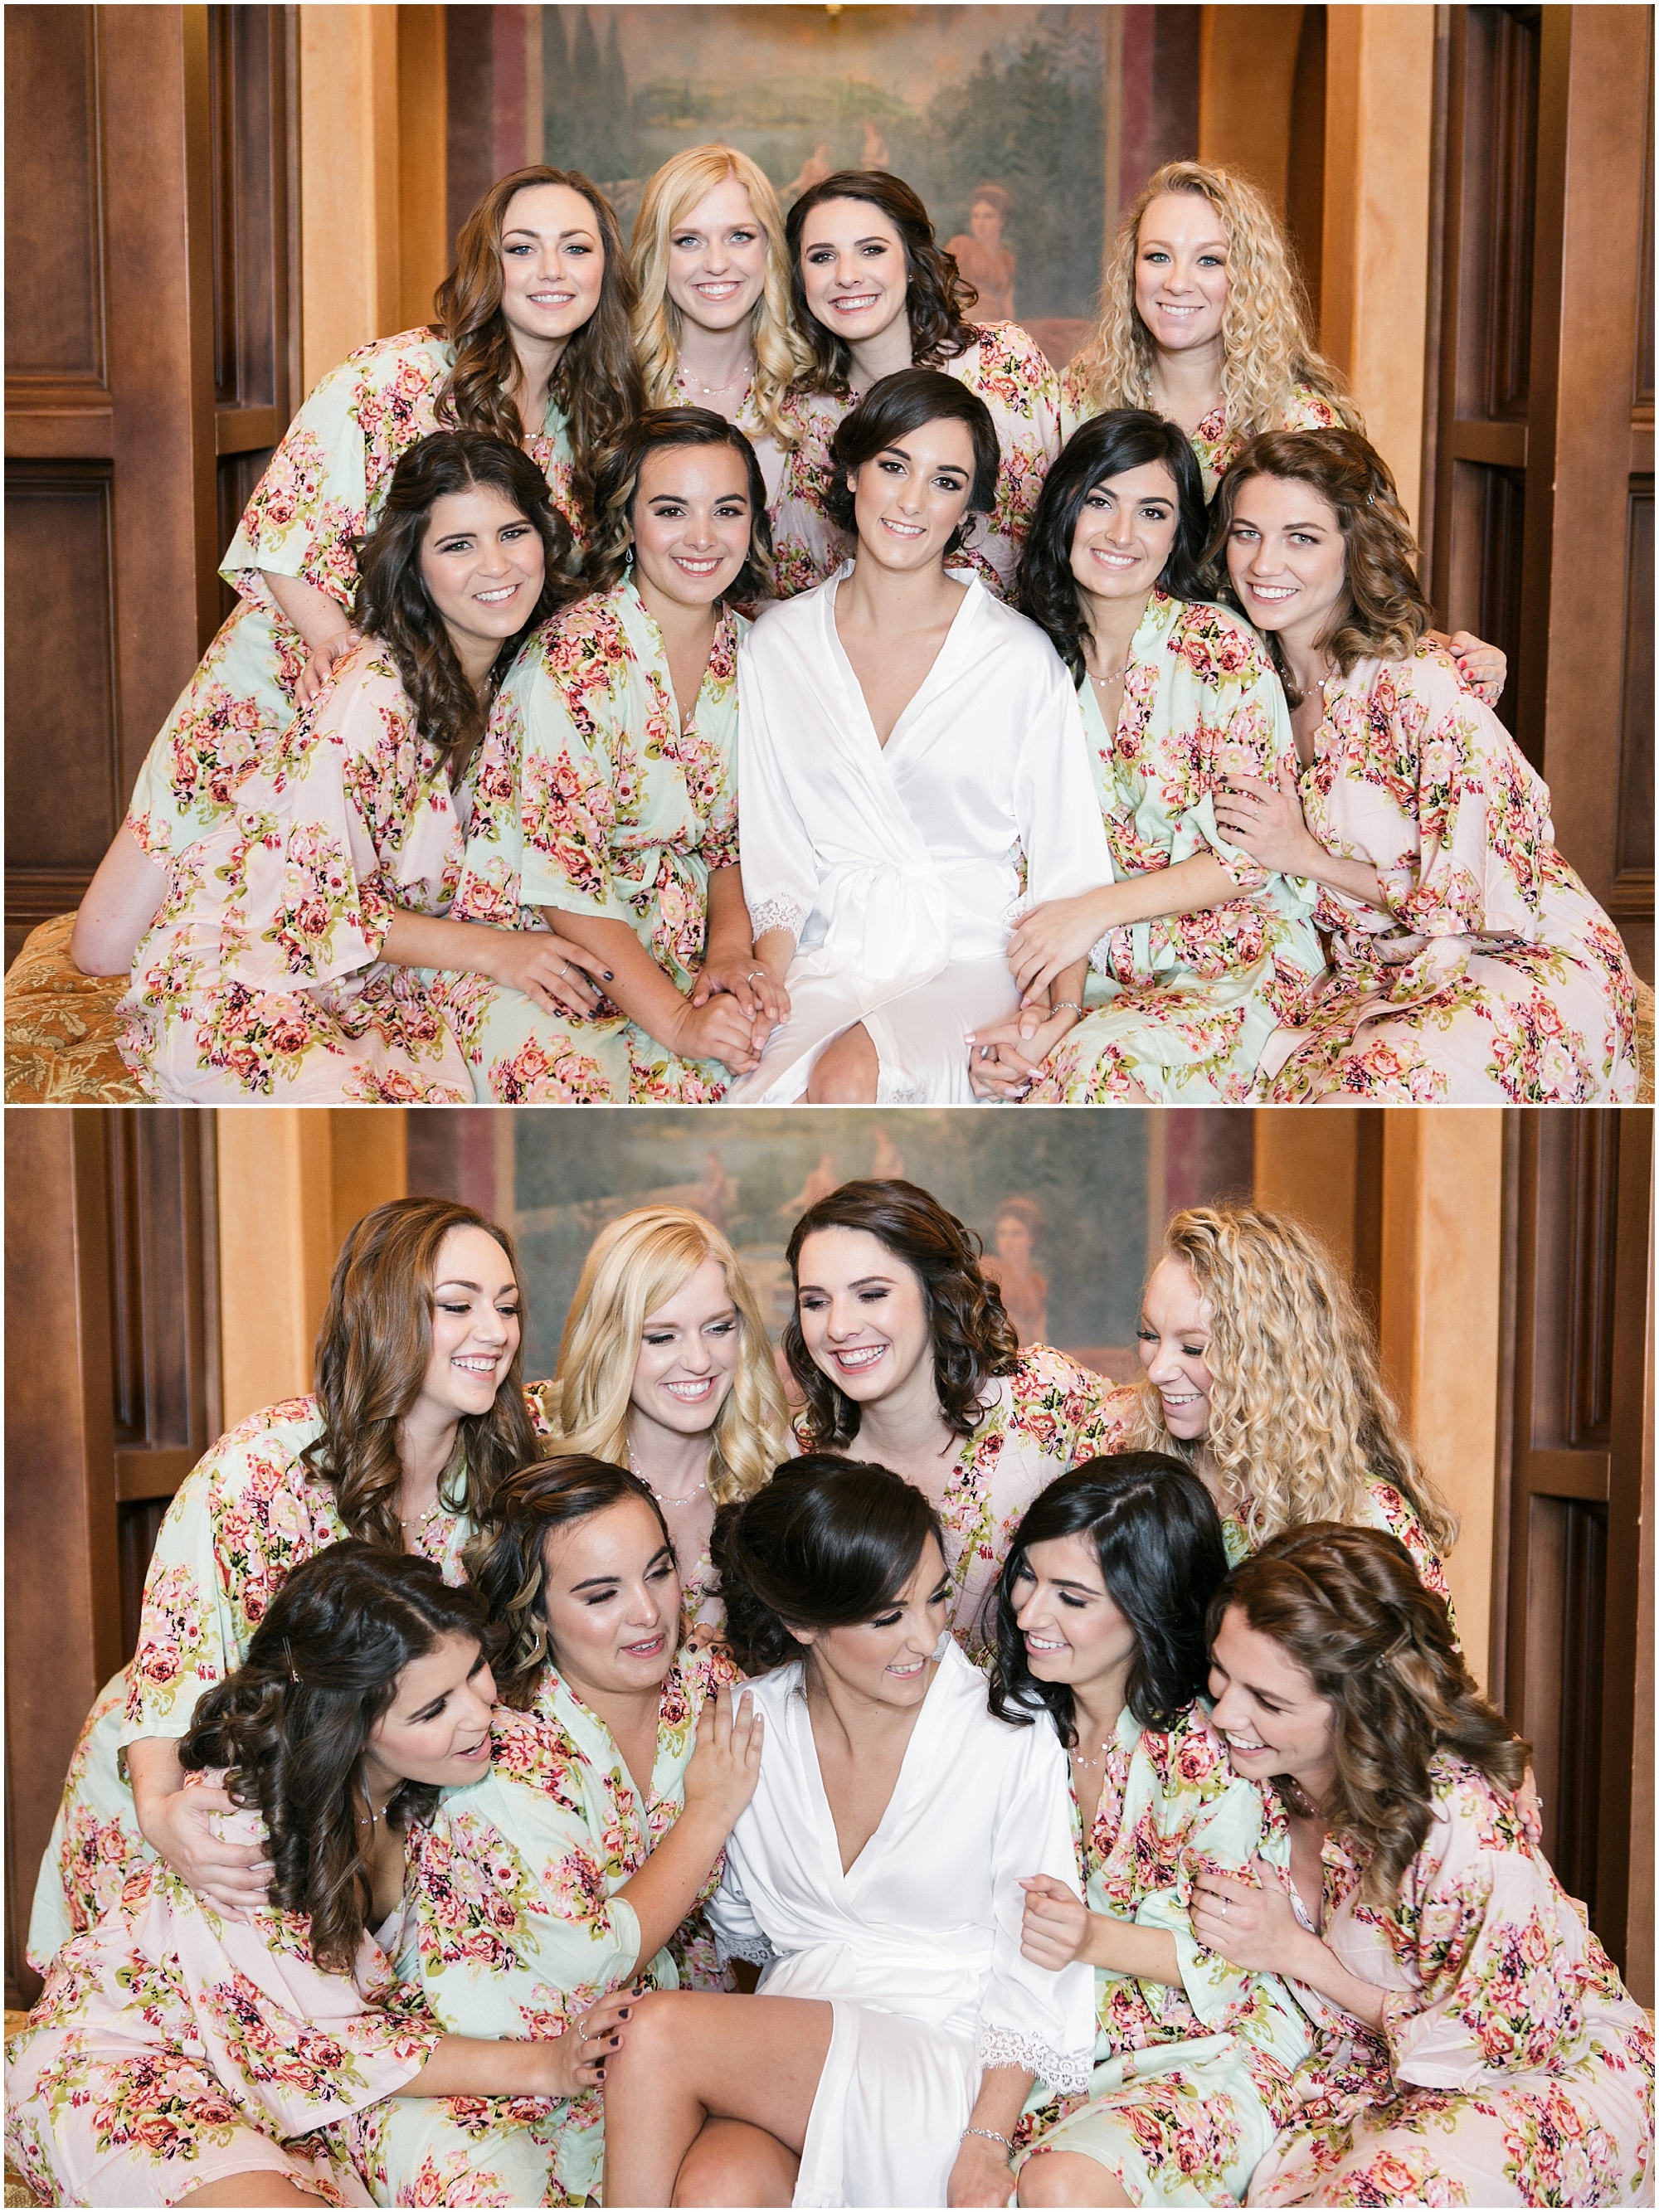 Bridal party in flower robes getting ready for a Bella Collina wedding.